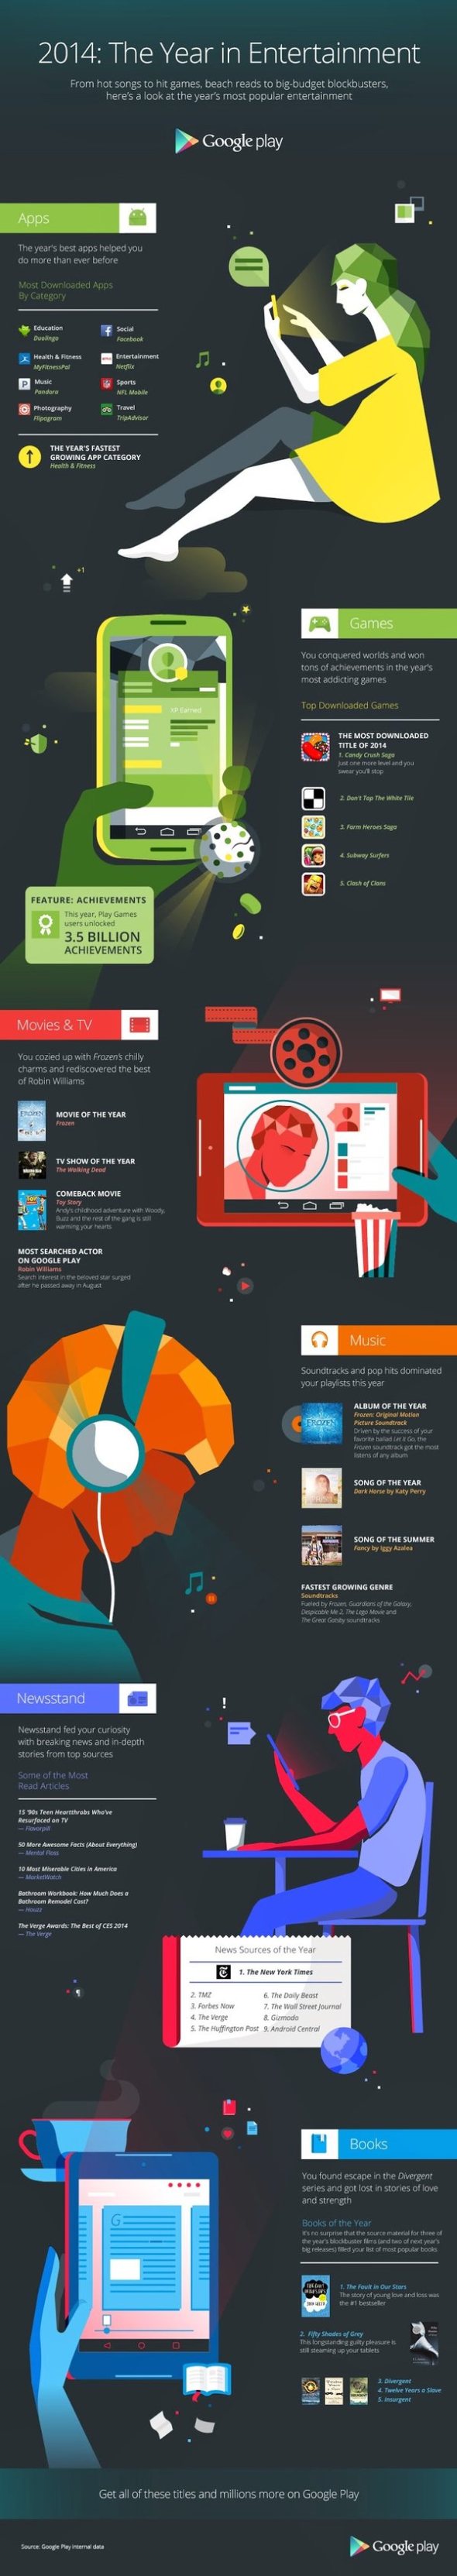 rsz_google_play_-_end_of_year_infographic_-_2014_-_final